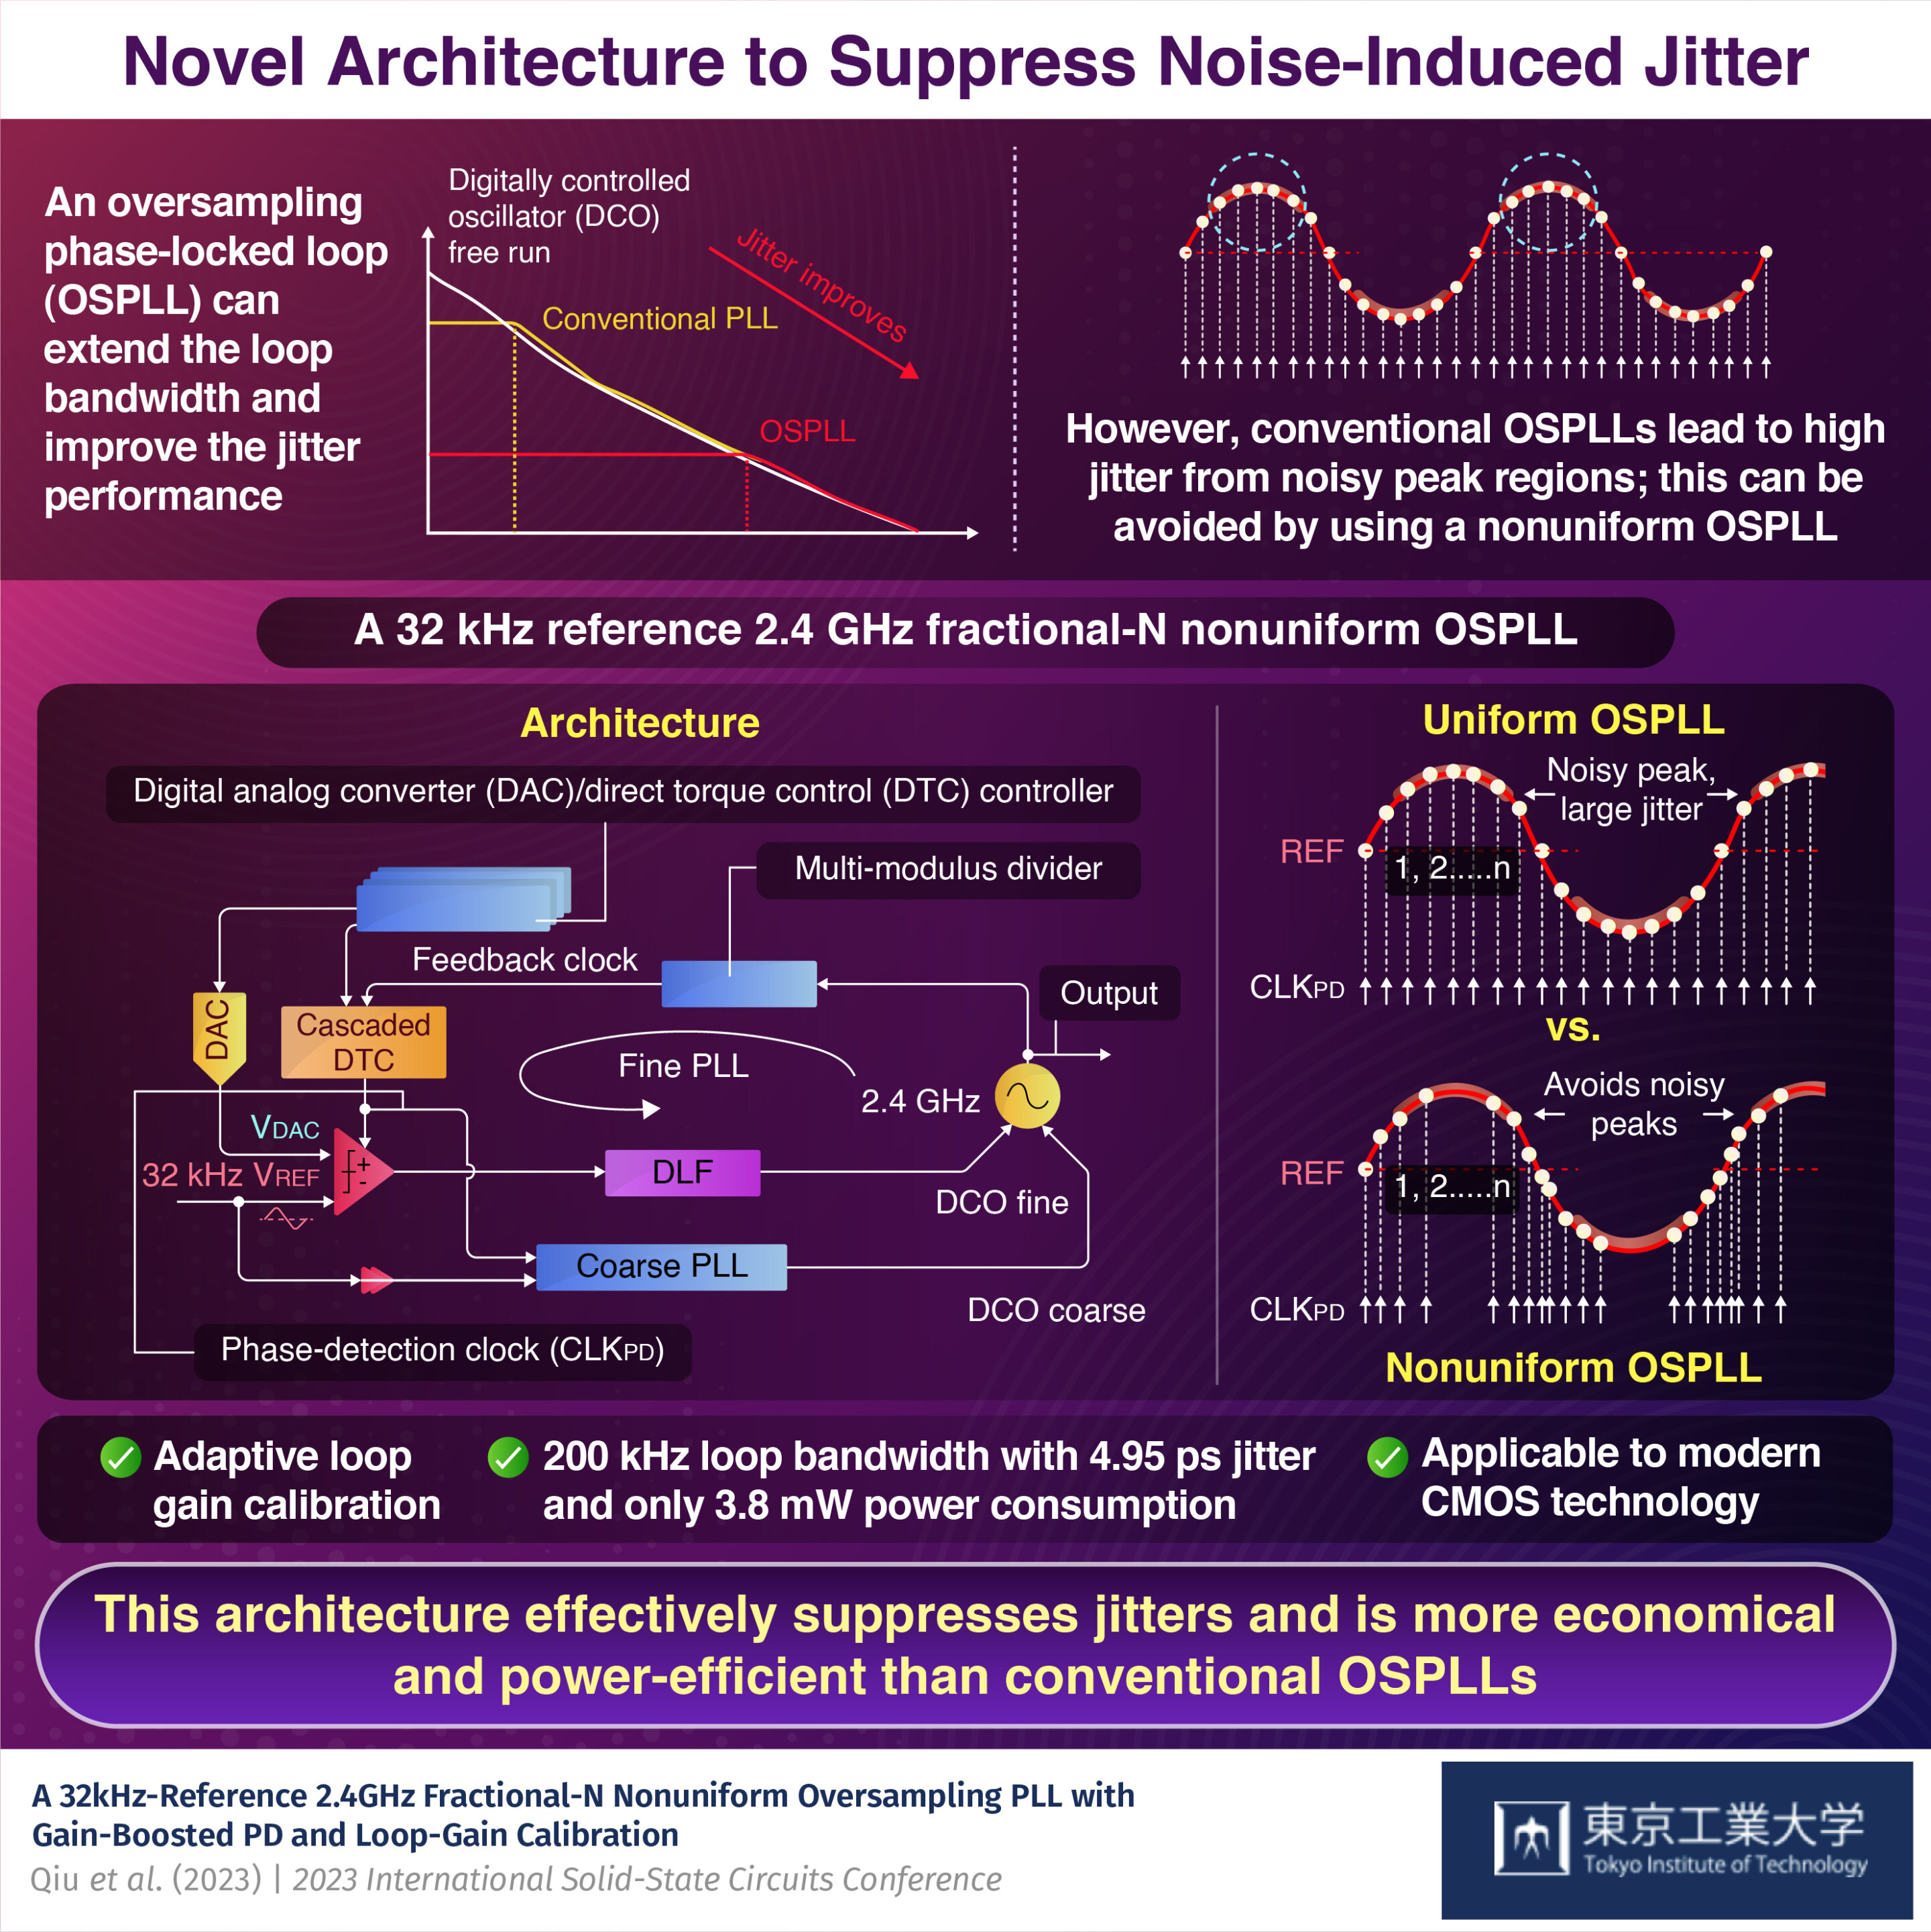 Novel architecture can reduce noise-induced jitters in digital technology